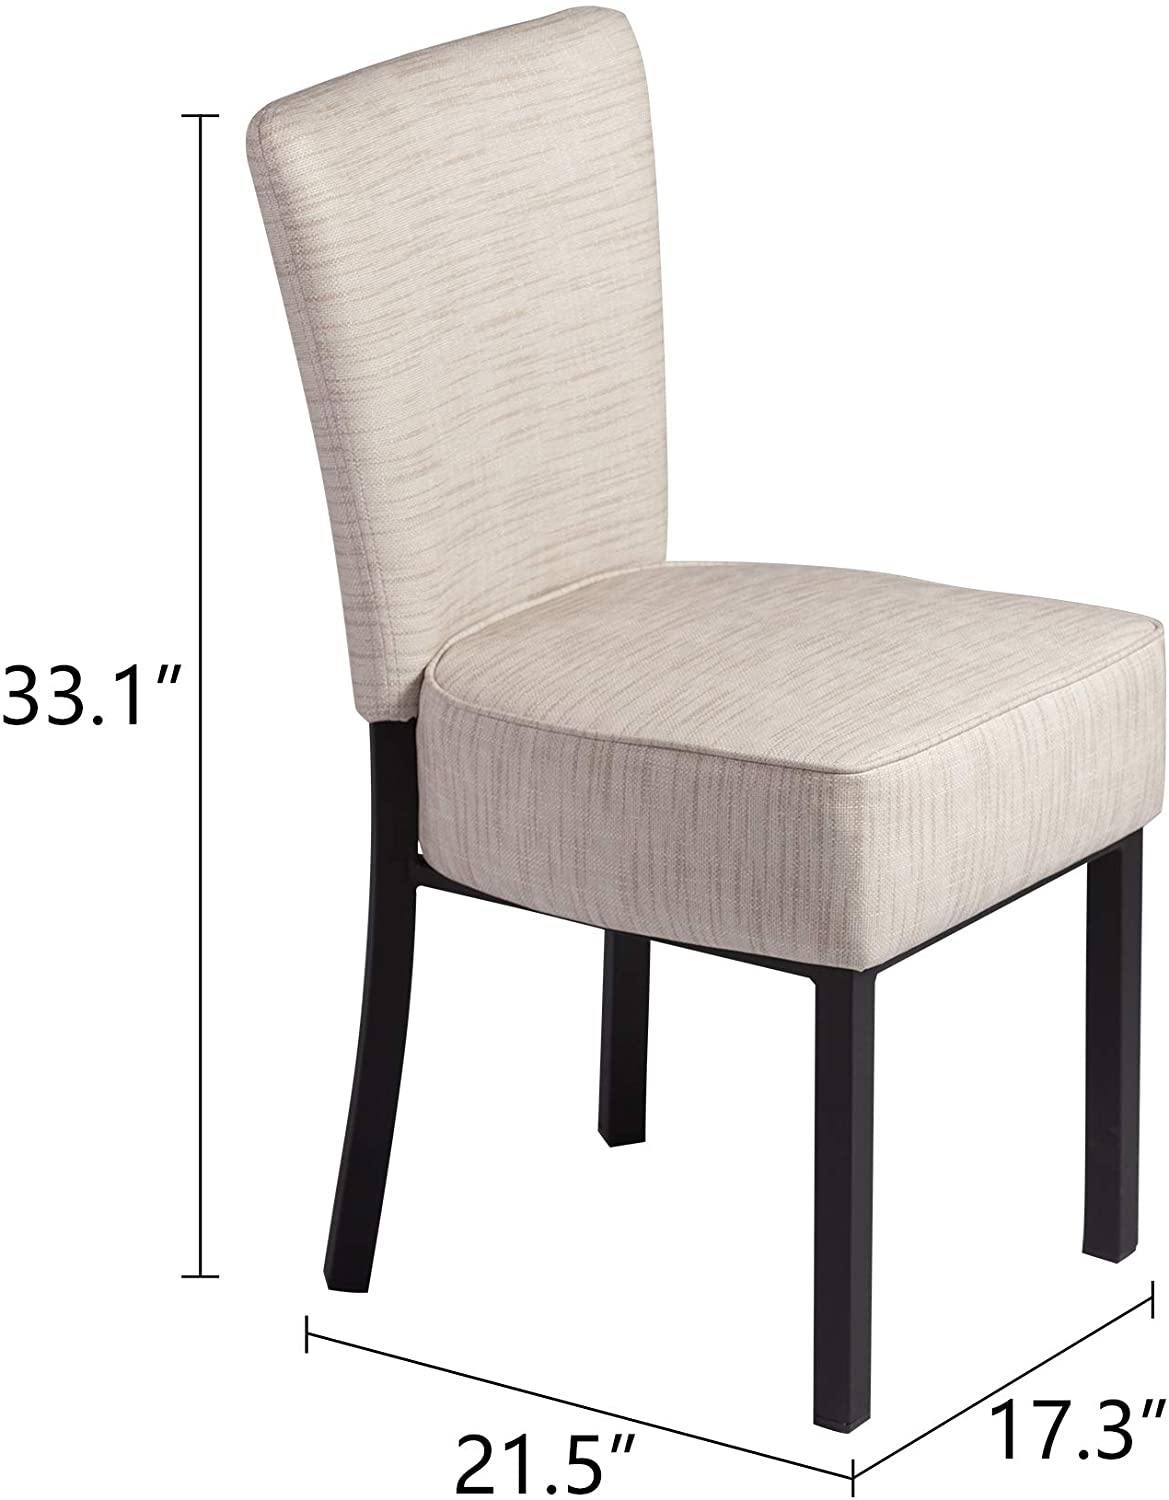 Upholstered Dining Chairs, Kitchen PU Leather Padded Chair, Modern Dining Room Furniture, Set of 2(White) - Bosonshop